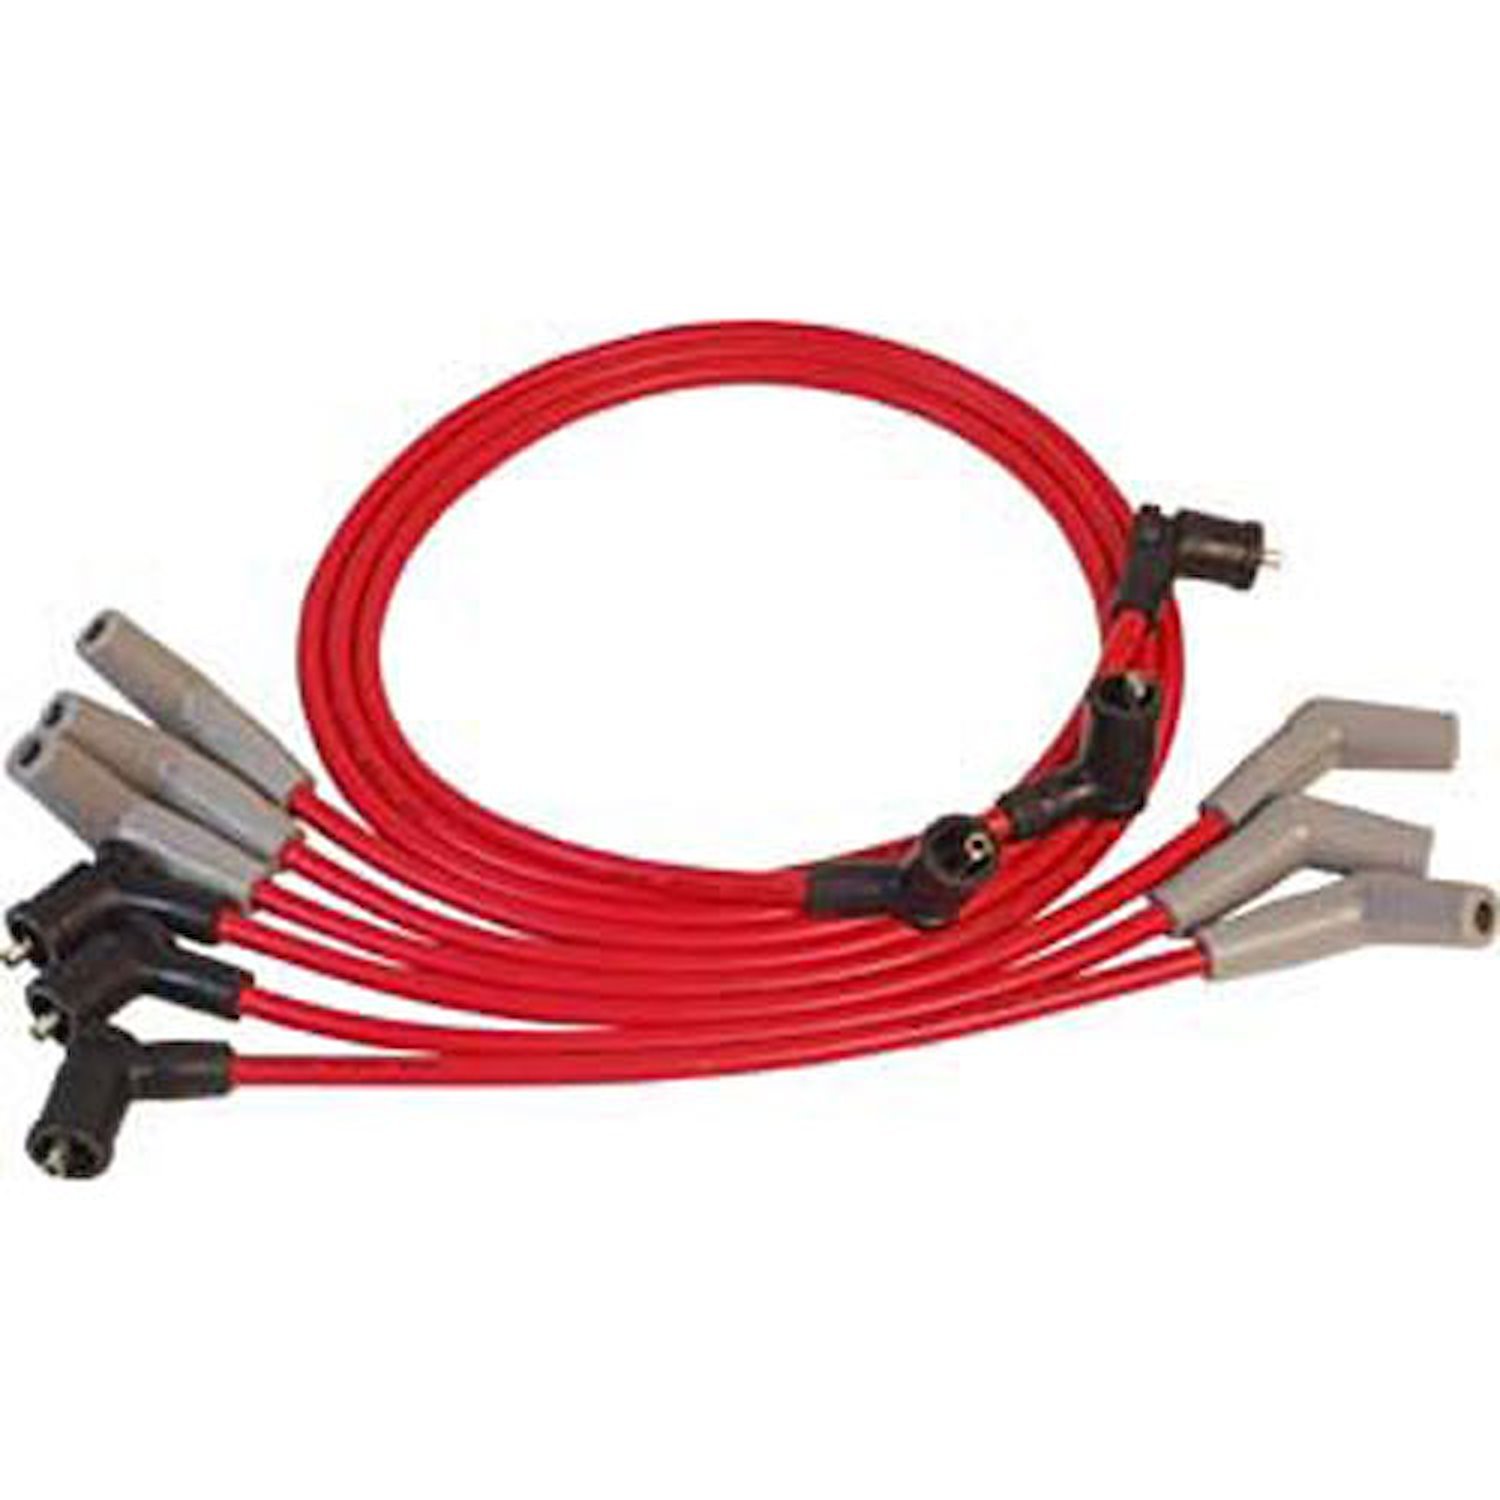 Super Conductor 8.5mm Wires, Red